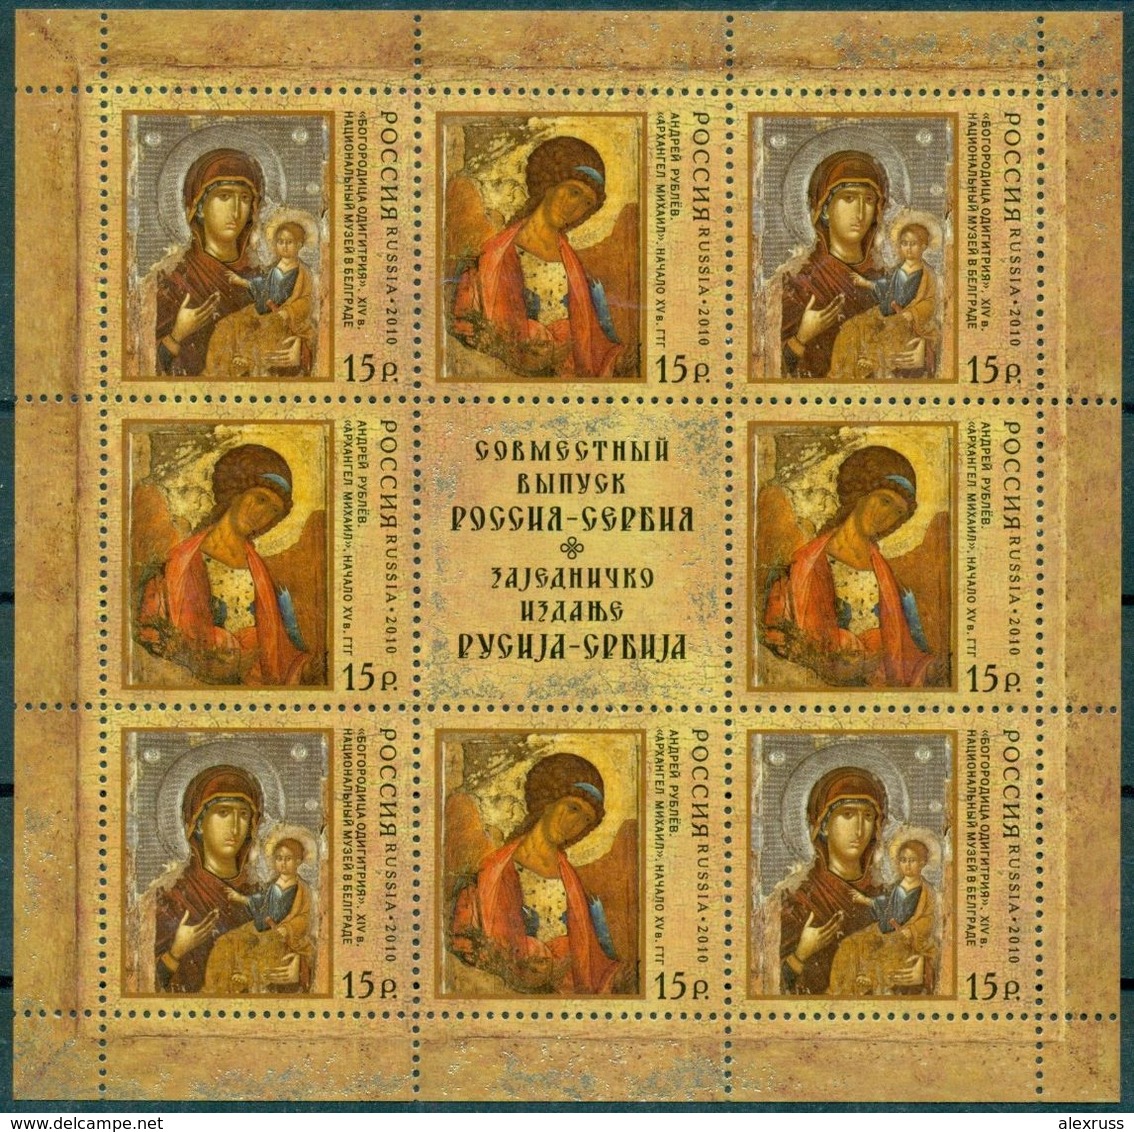 Russia 2010,Miniature Sheet Join Issue W/Serbia,Art Religious Icons Of Russia & Serbia,Scott # 7221,VF MNH** (OR-3) - Nuevos